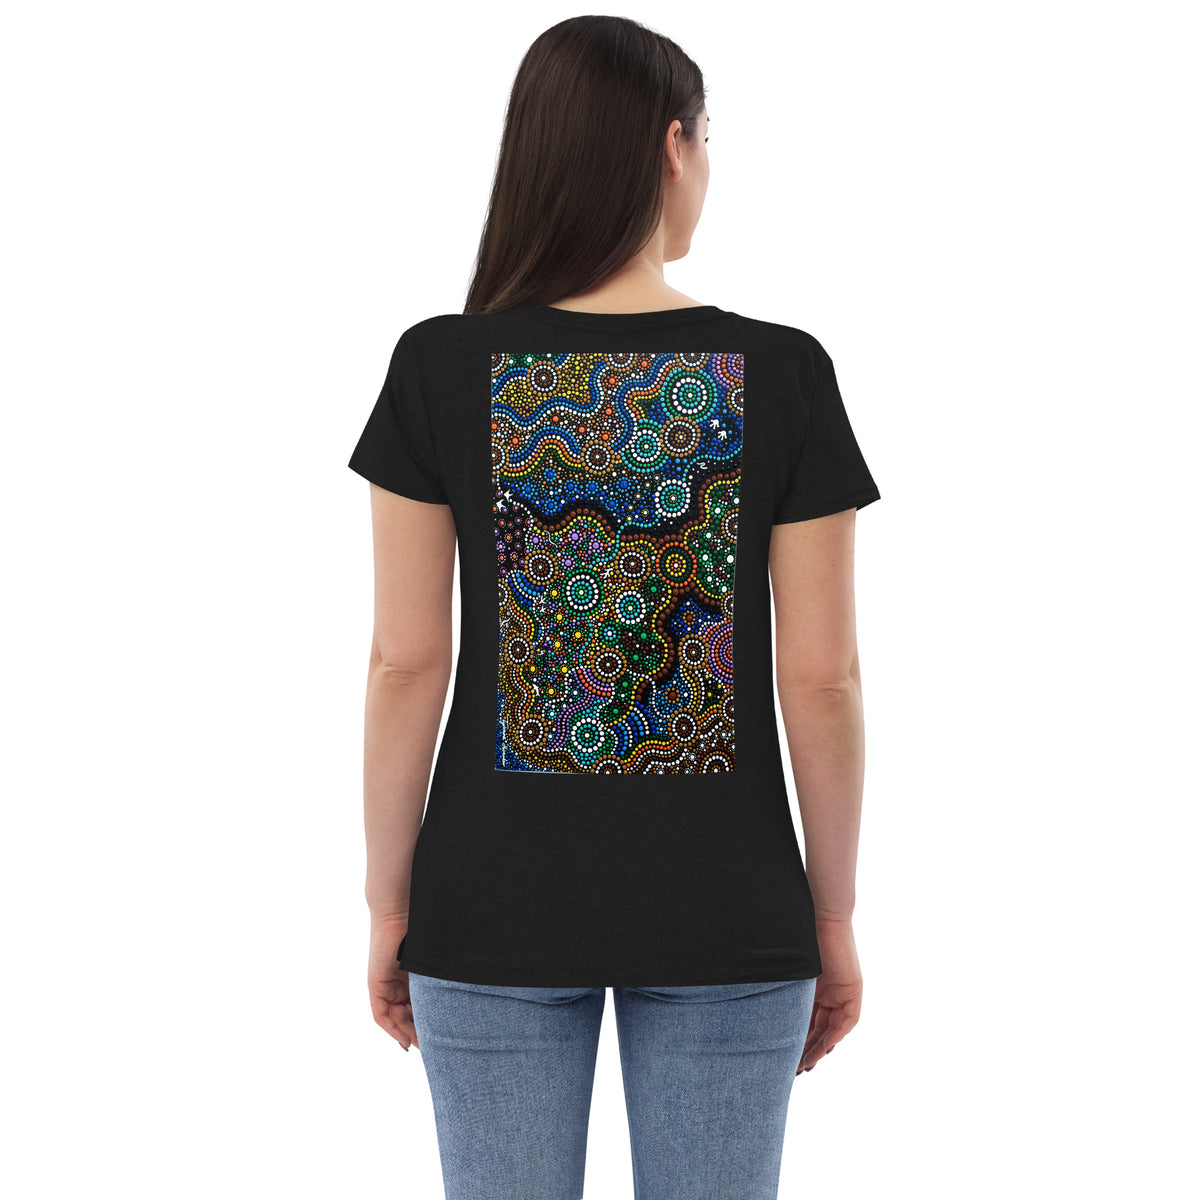 Glow Collection - Australiana Edition - Women’s recycled v-neck t-shirt